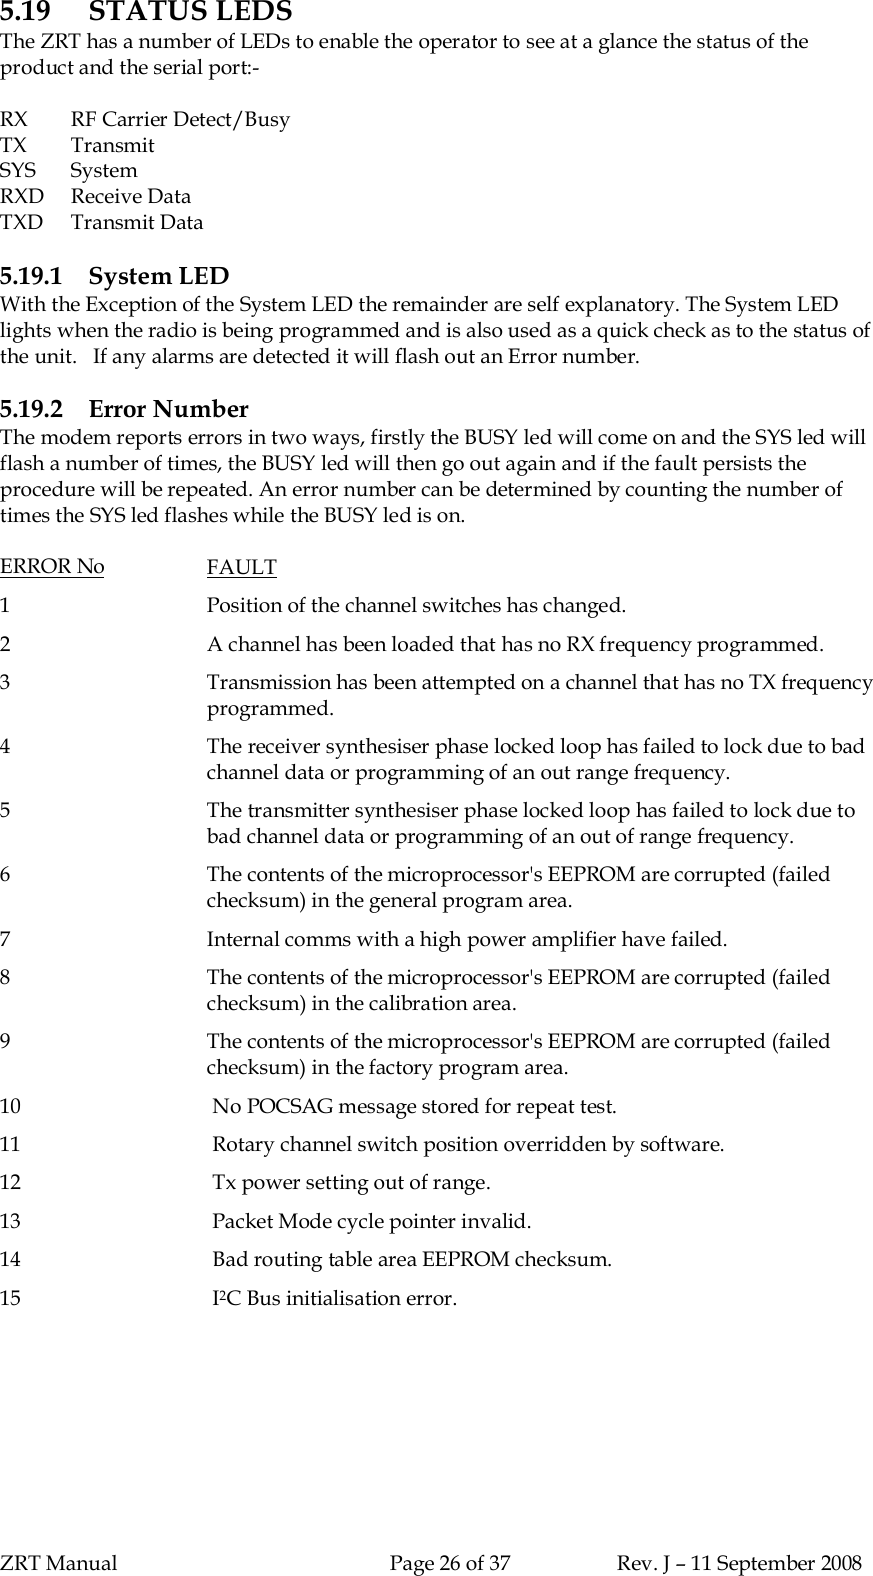 ZRT Manual Page 26 of 37 Rev. J – 11 September 20085.19 STATUS LEDSThe ZRT has a number of LEDs to enable the operator to see at a glance the status of theproduct and the serial port:-RX RF Carrier Detect/BusyTX TransmitSYS SystemRXD  Receive DataTXD  Transmit Data5.19.1 System LEDWith the Exception of the System LED the remainder are self explanatory. The System LEDlights when the radio is being programmed and is also used as a quick check as to the status ofthe unit.   If any alarms are detected it will flash out an Error number.5.19.2 Error NumberThe modem reports errors in two ways, firstly the BUSY led will come on and the SYS led willflash a number of times, the BUSY led will then go out again and if the fault persists theprocedure will be repeated. An error number can be determined by counting the number oftimes the SYS led flashes while the BUSY led is on.ERROR No FAULT1Position of the channel switches has changed.2A channel has been loaded that has no RX frequency programmed.3Transmission has been attempted on a channel that has no TX frequencyprogrammed.4The receiver synthesiser phase locked loop has failed to lock due to badchannel data or programming of an out range frequency.5The transmitter synthesiser phase locked loop has failed to lock due tobad channel data or programming of an out of range frequency.6The contents of the microprocessor&apos;s EEPROM are corrupted (failedchecksum) in the general program area.7Internal comms with a high power amplifier have failed.8The contents of the microprocessor&apos;s EEPROM are corrupted (failedchecksum) in the calibration area.9The contents of the microprocessor&apos;s EEPROM are corrupted (failedchecksum) in the factory program area.10 No POCSAG message stored for repeat test.11 Rotary channel switch position overridden by software.12 Tx power setting out of range.13 Packet Mode cycle pointer invalid.14 Bad routing table area EEPROM checksum.15 I2C Bus initialisation error.